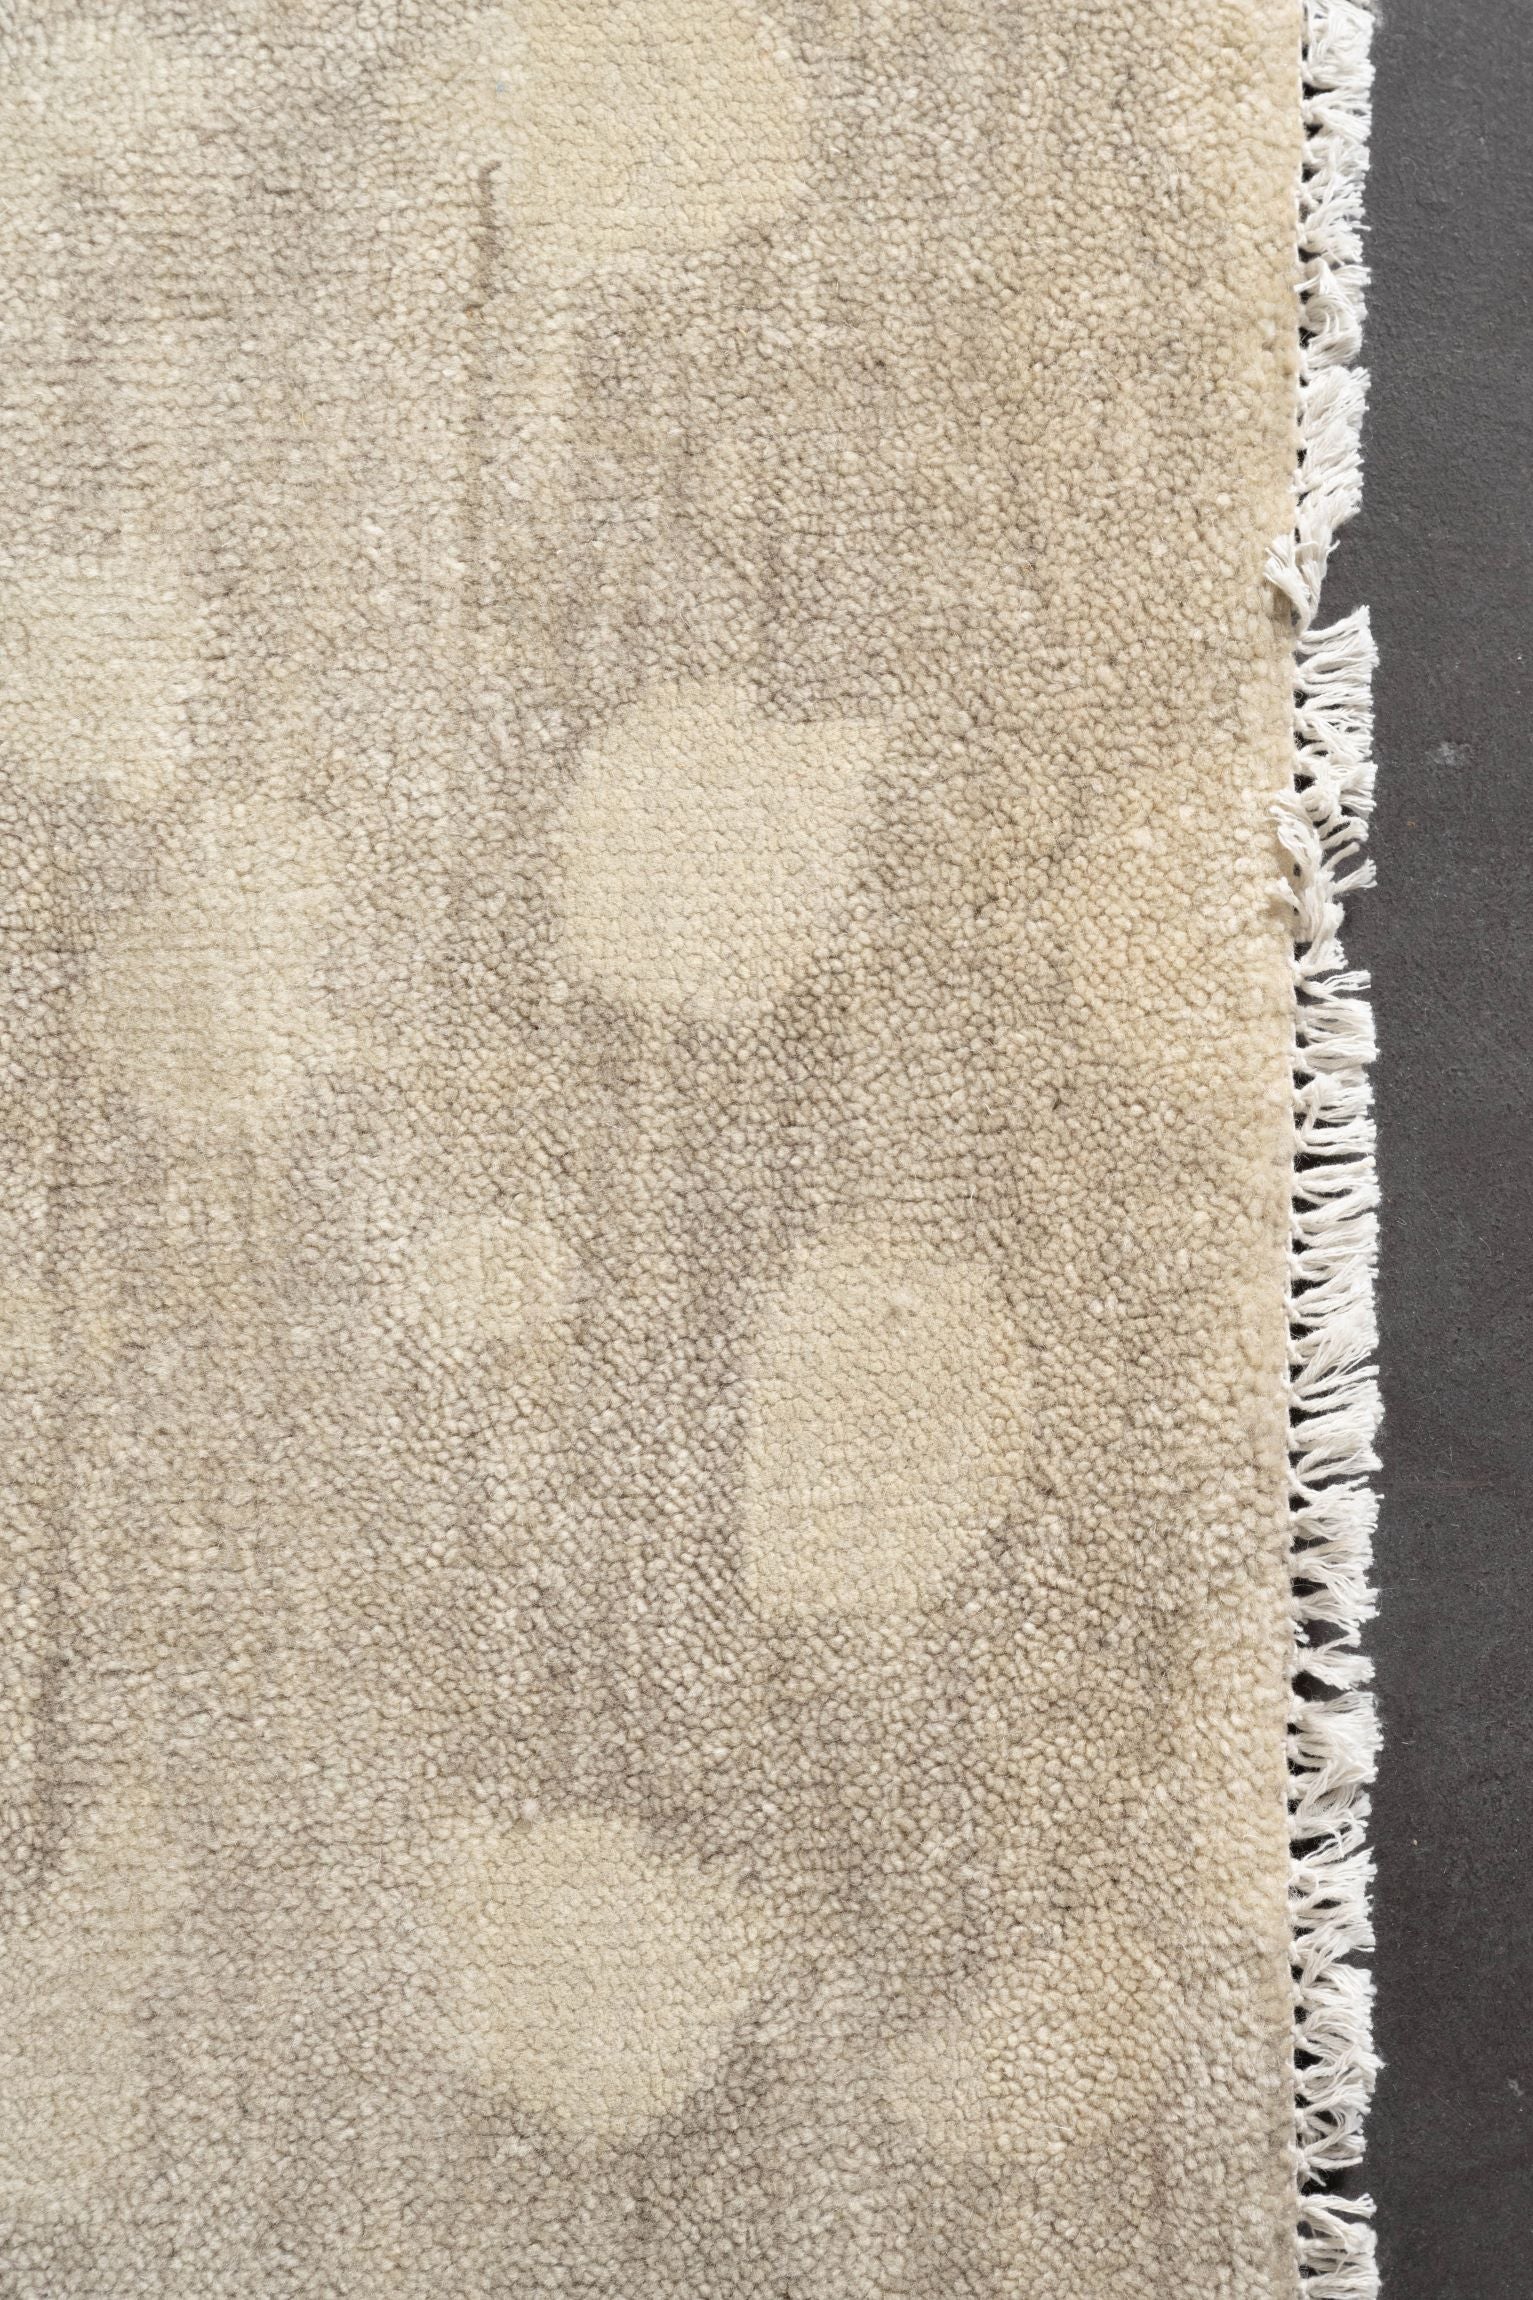 Neutral toned and hand-knotted Oushak style rug made of 100% New Zealand wool. This rug has a unique spotted pattern with tan, taupe, beige, ivory, and brown colors.